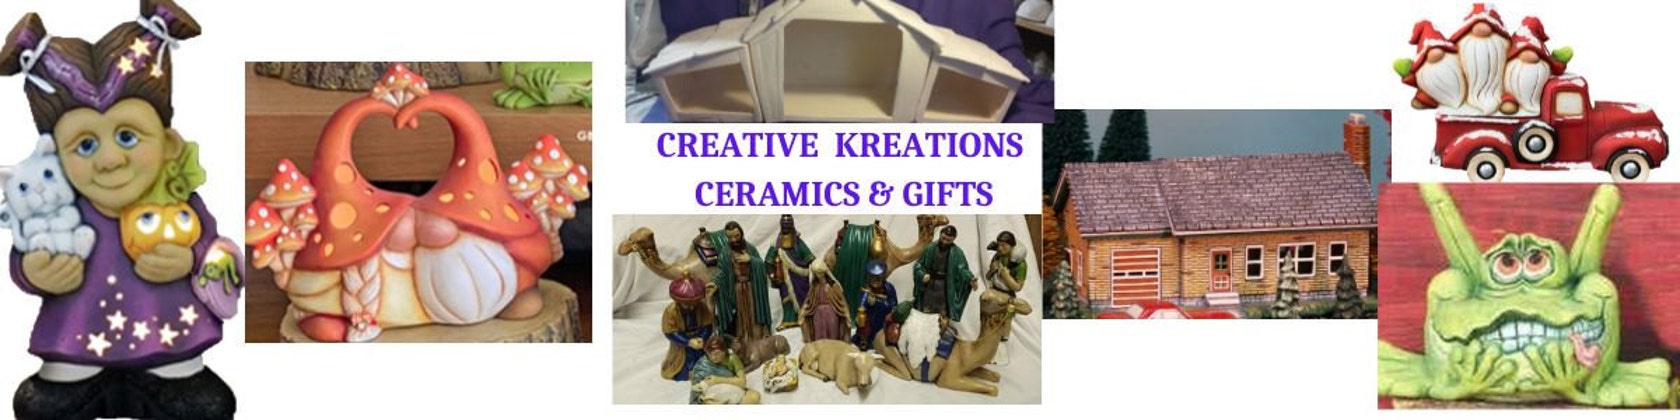 Creative Kreations Ceramics and Gifts Santas Castle Village House 9 x 9 x  5 Ceramic Bisque, Ready to Paint - Creative Kreations Ceramics and Gifts